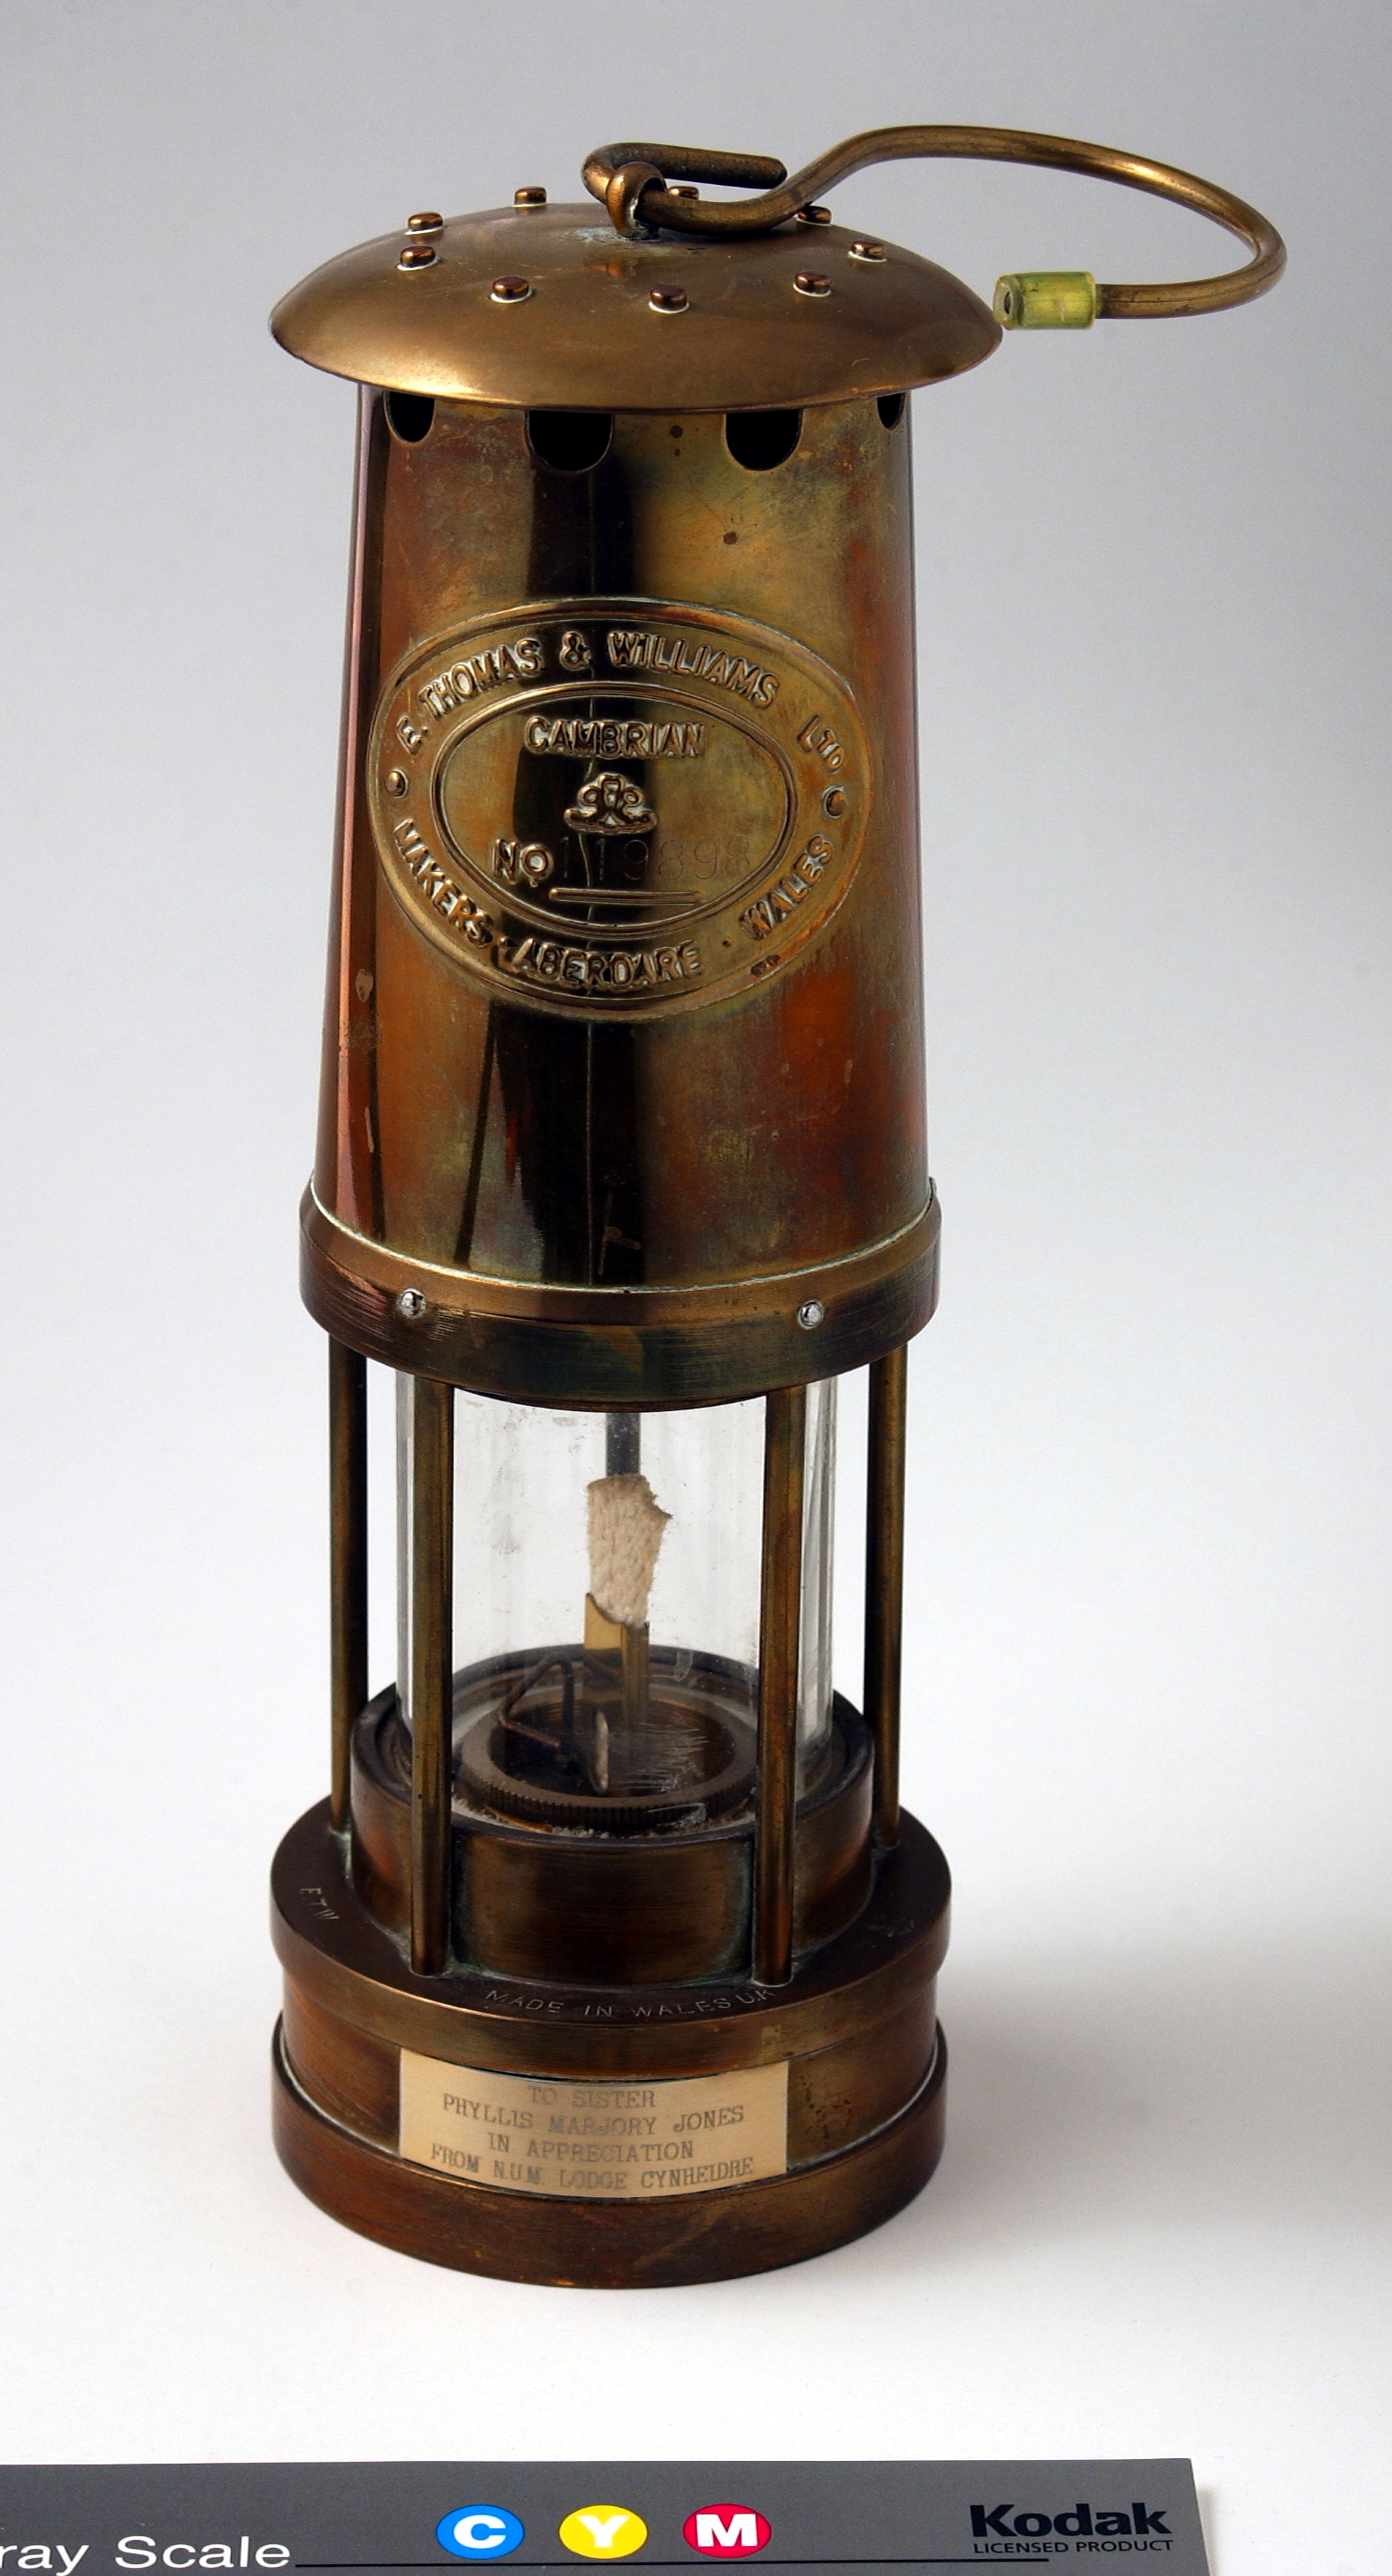 Cambrian No 1 flame safety lamp